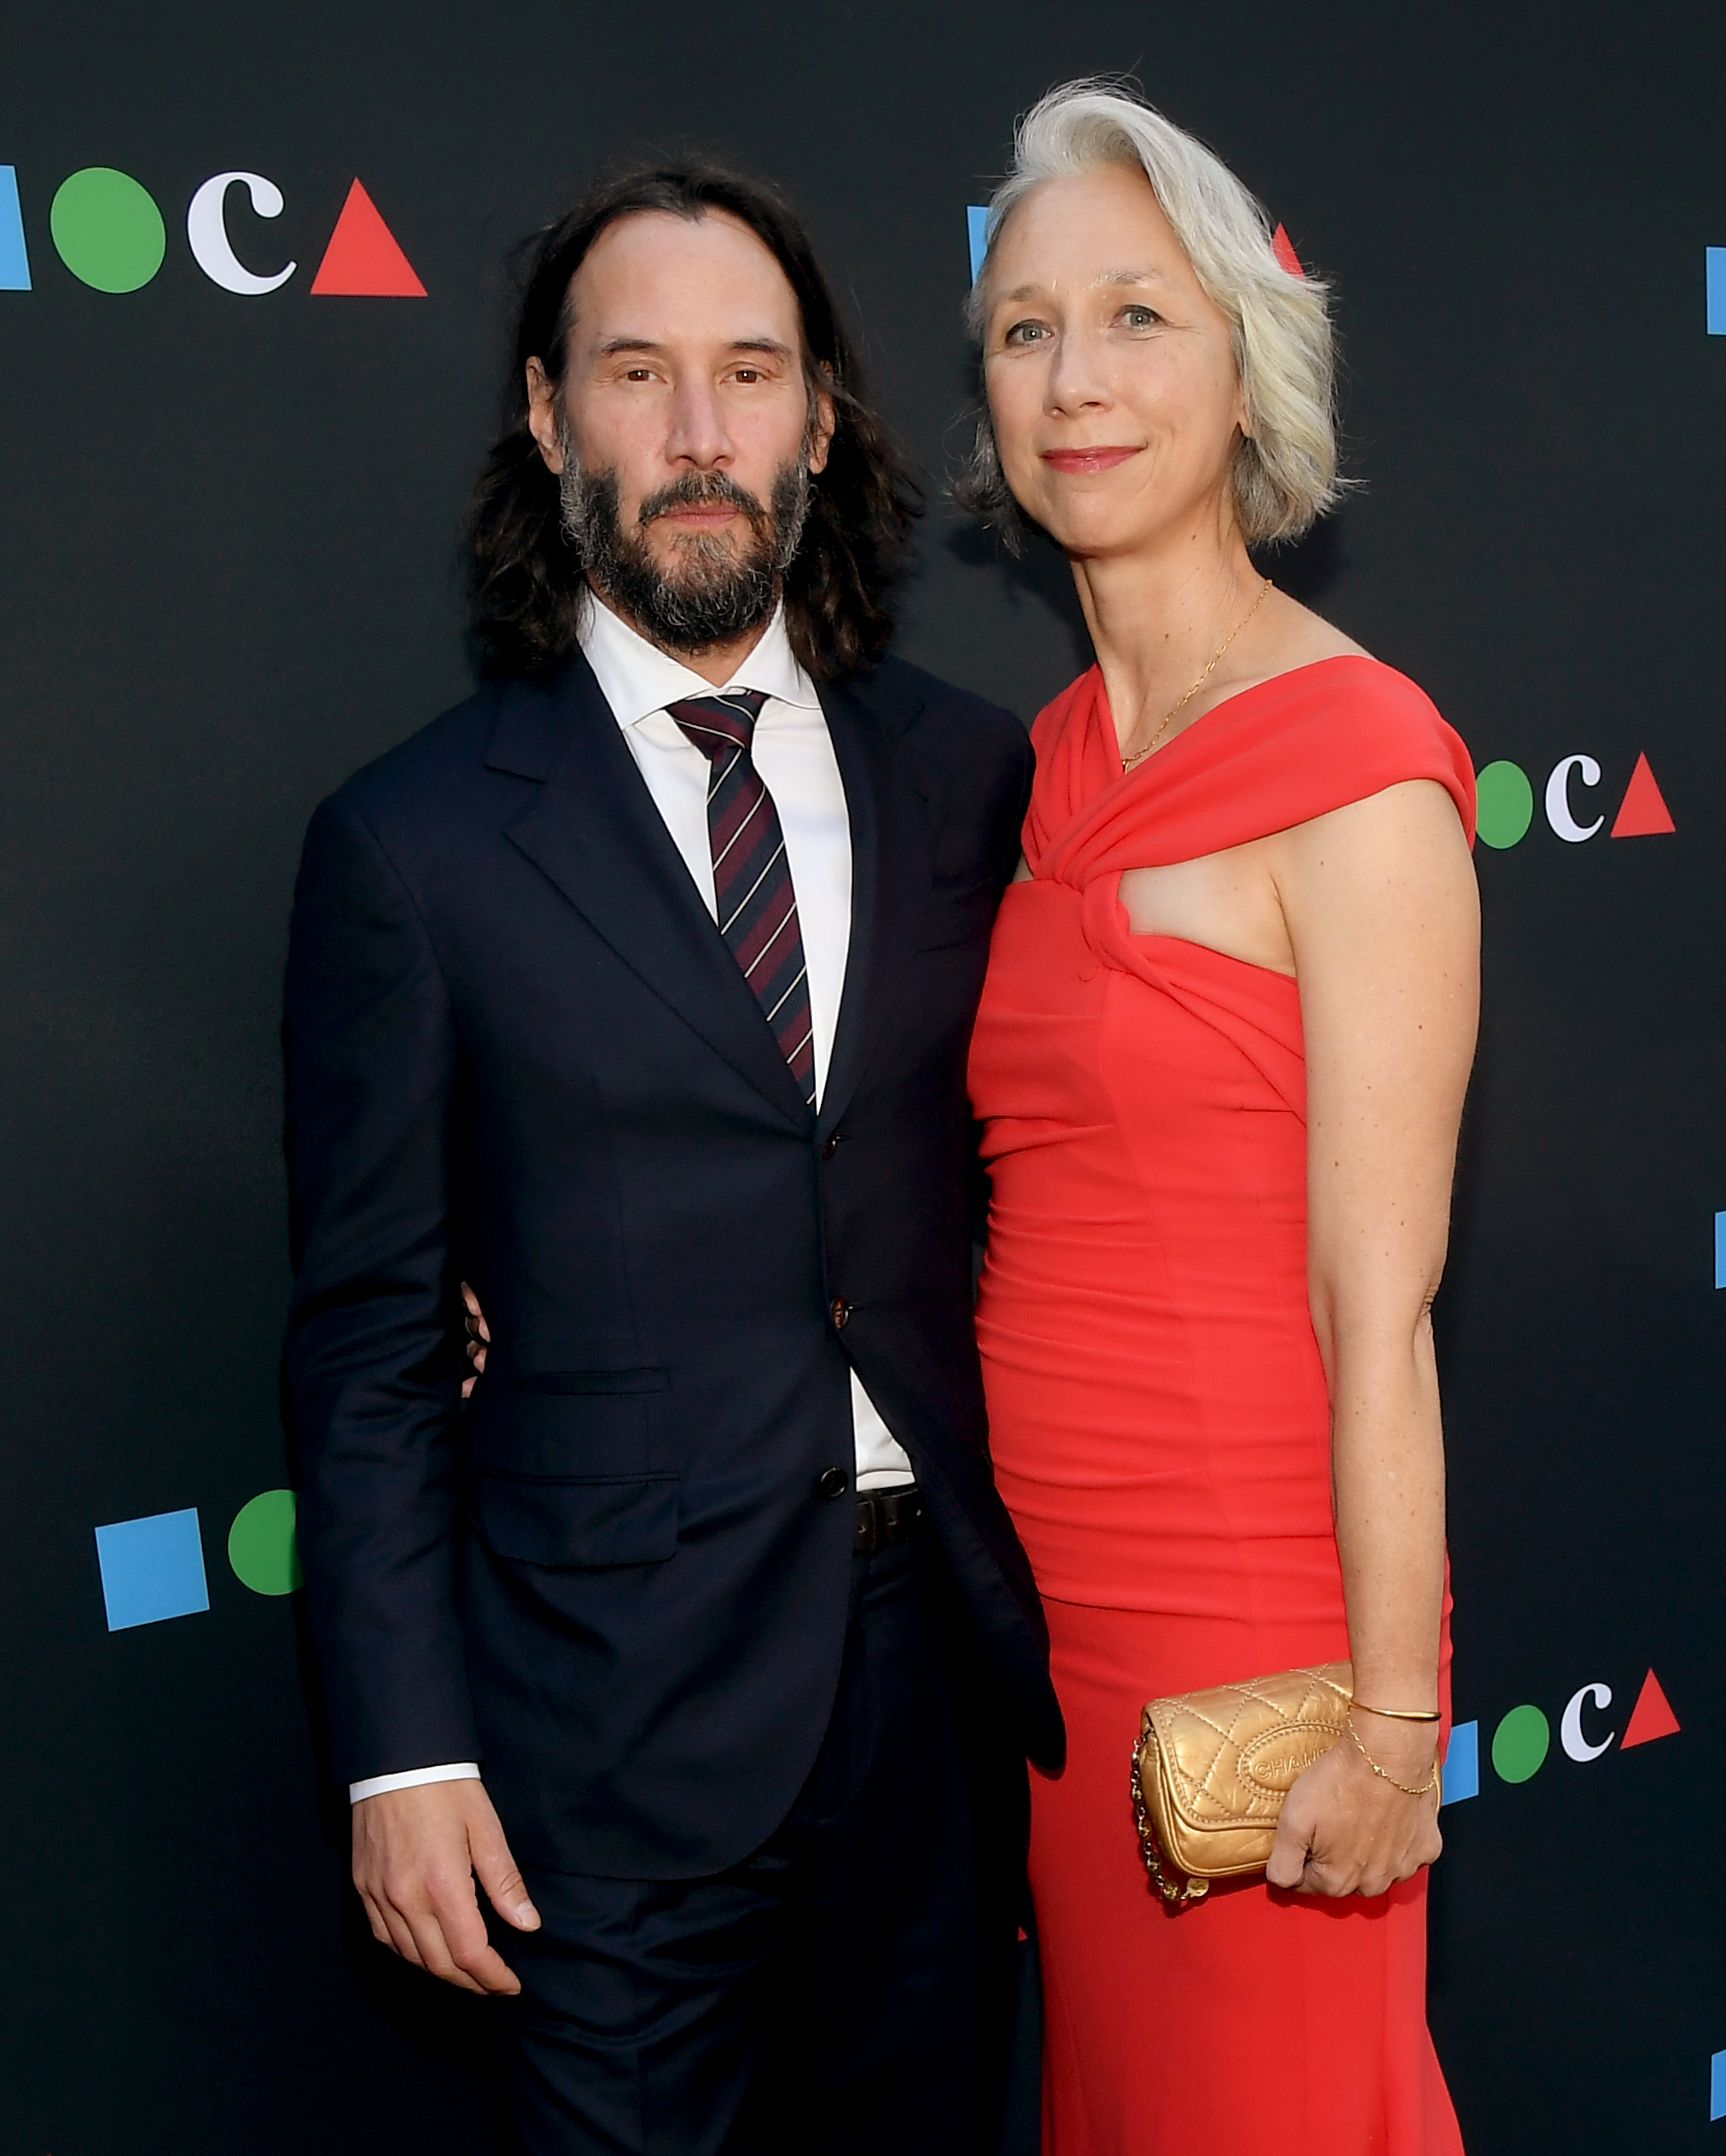 Keanu Reeves and Alexandra Grant at the MOCA Gala in Los Angeles, California on June 4, 2022 | Source: Getty Images